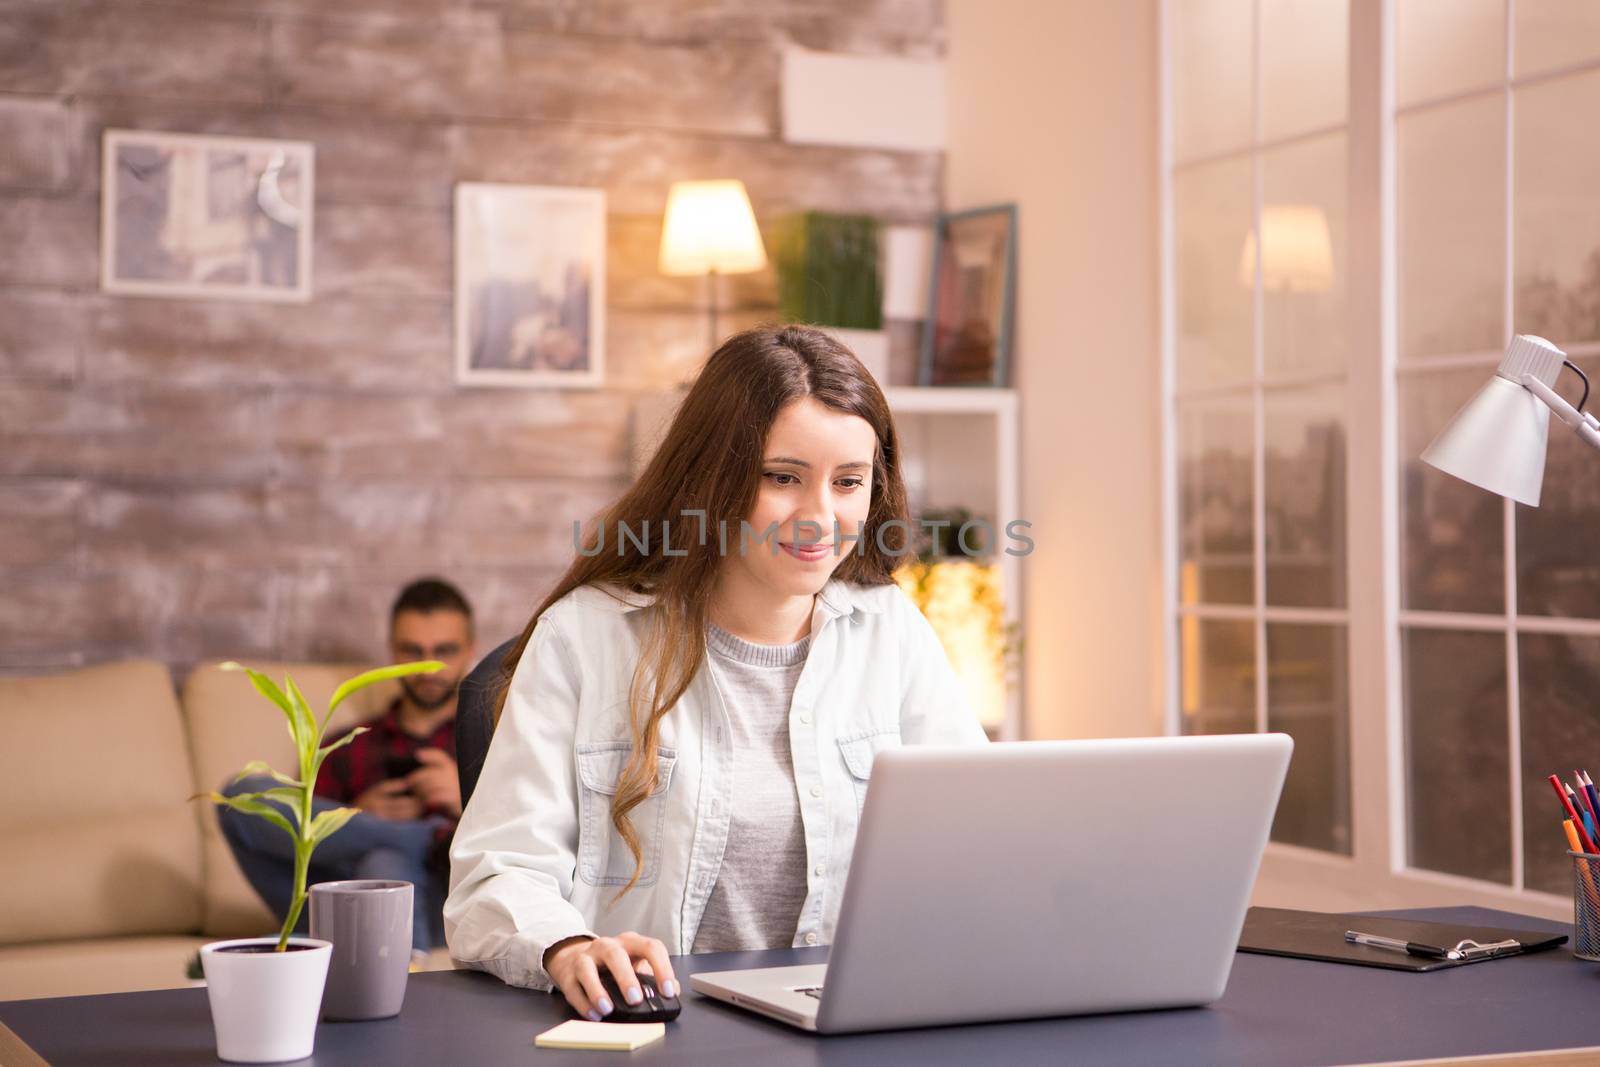 Beautiful young woman working on laptop and smiling. Woman working from home. Boyfriend relaxing on sofa in the background.